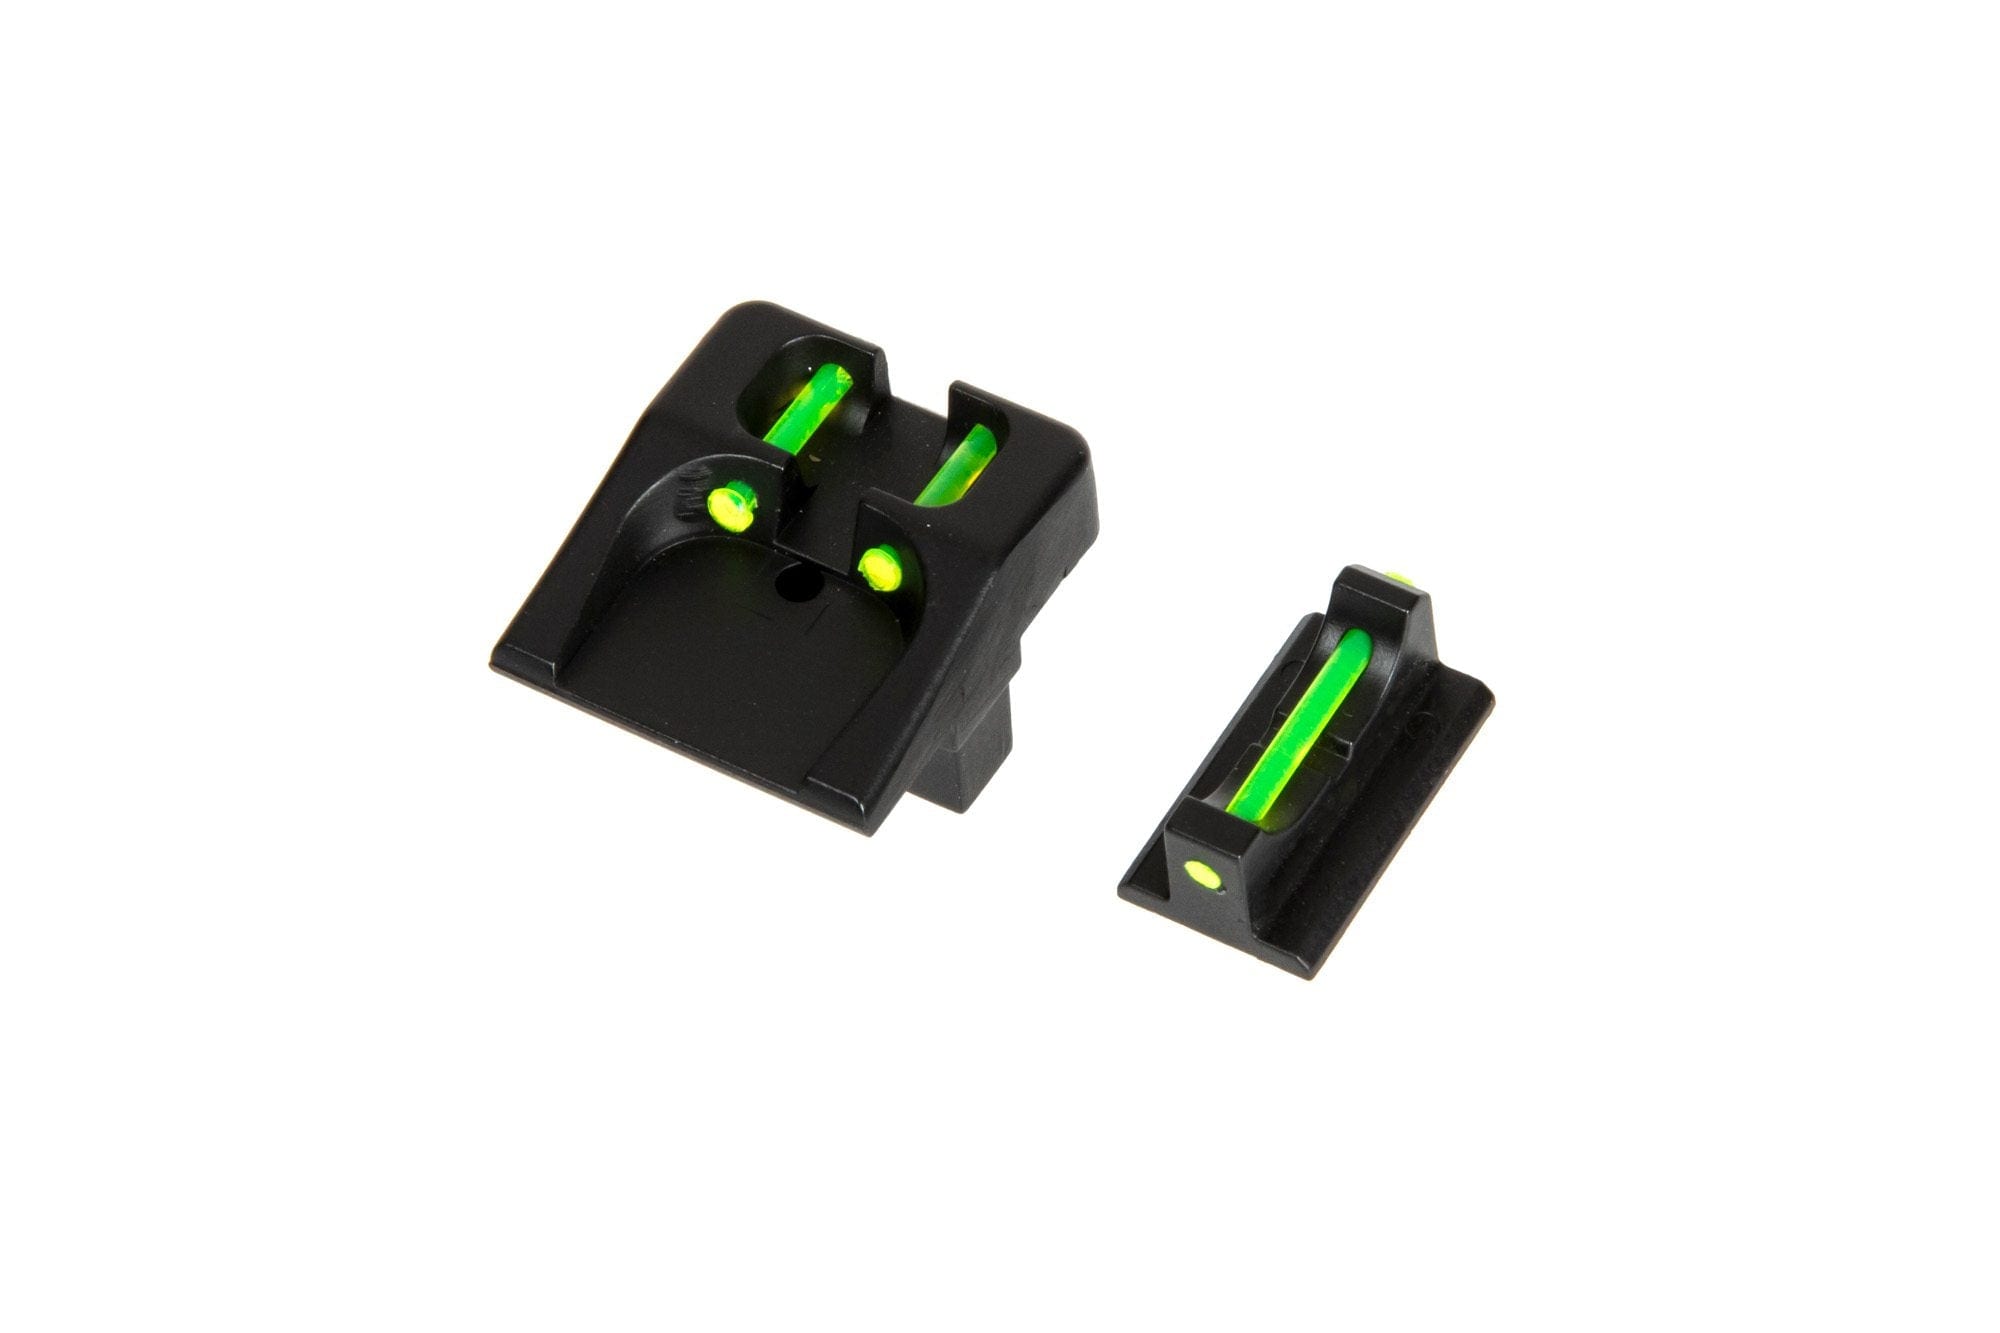 Set of Fluorescent Iron Sights for G17 Replicas